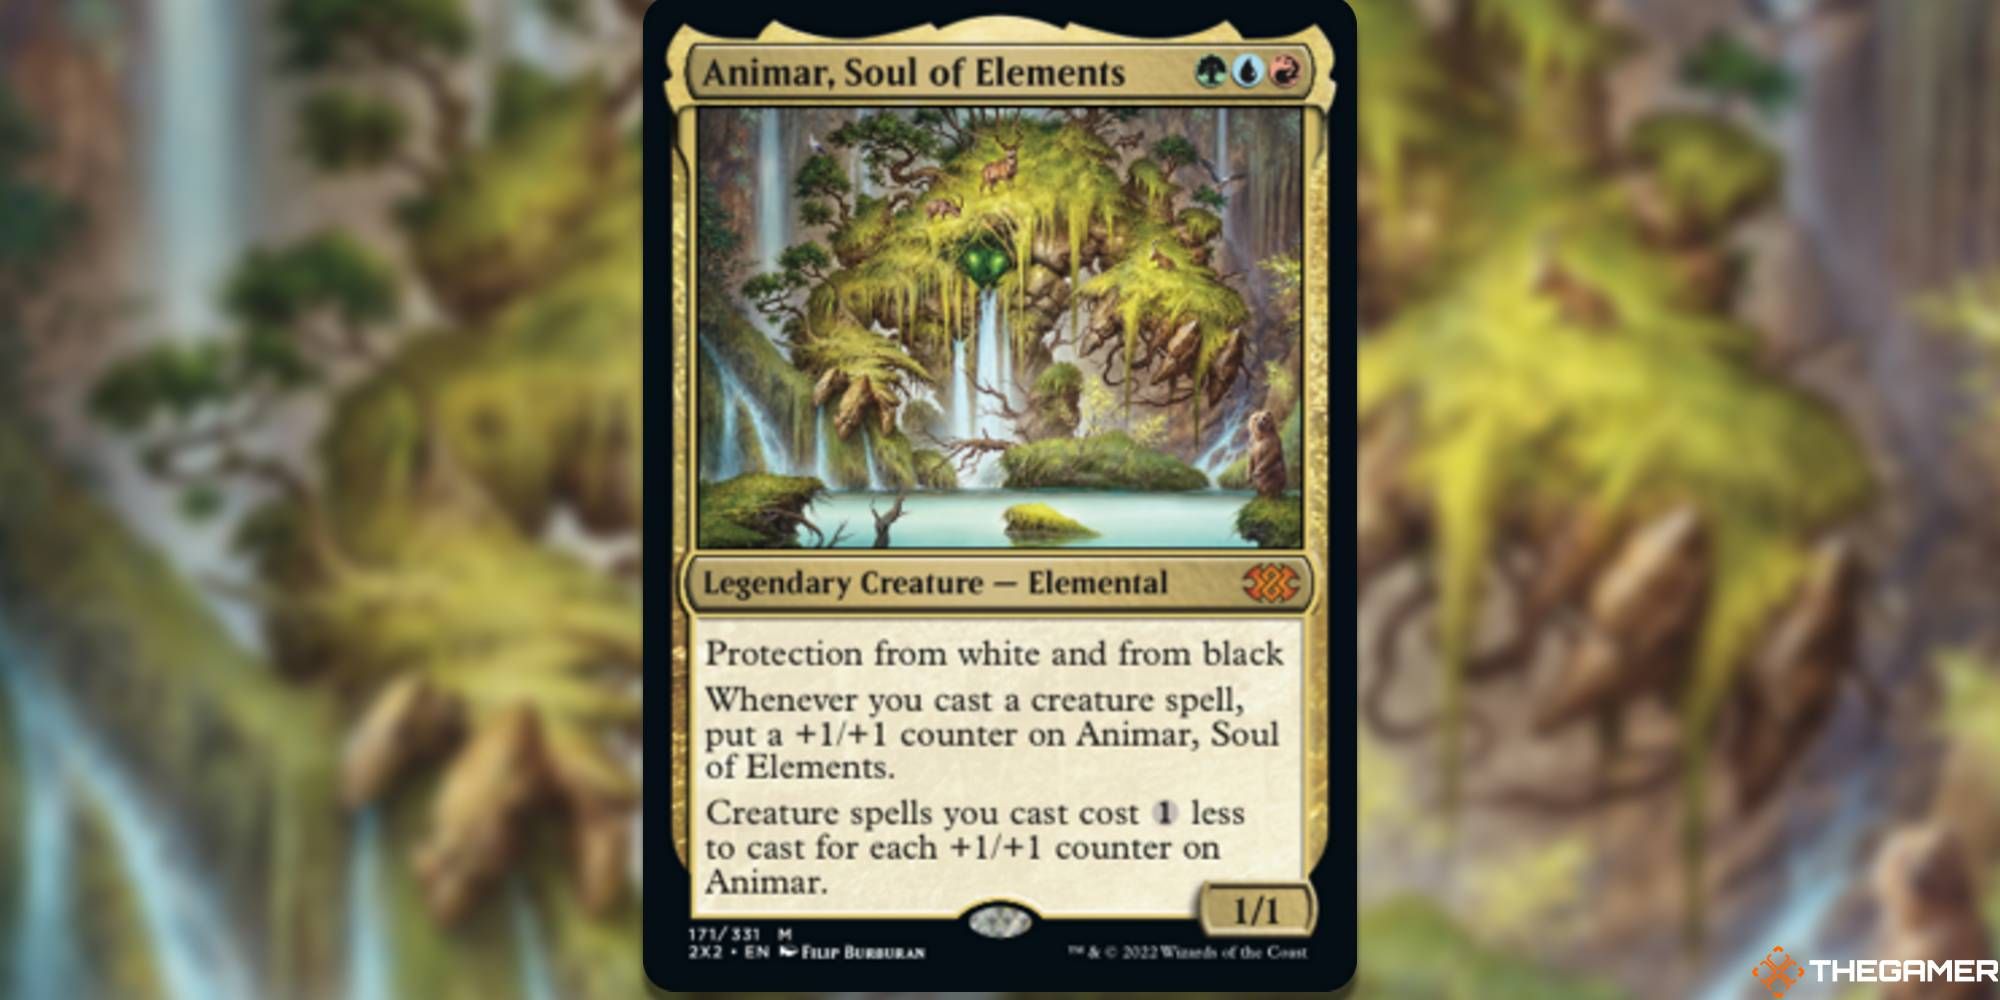 Image of the Animar, Soul of Elements card from Magic: The Gathering with art by Filip Burburan